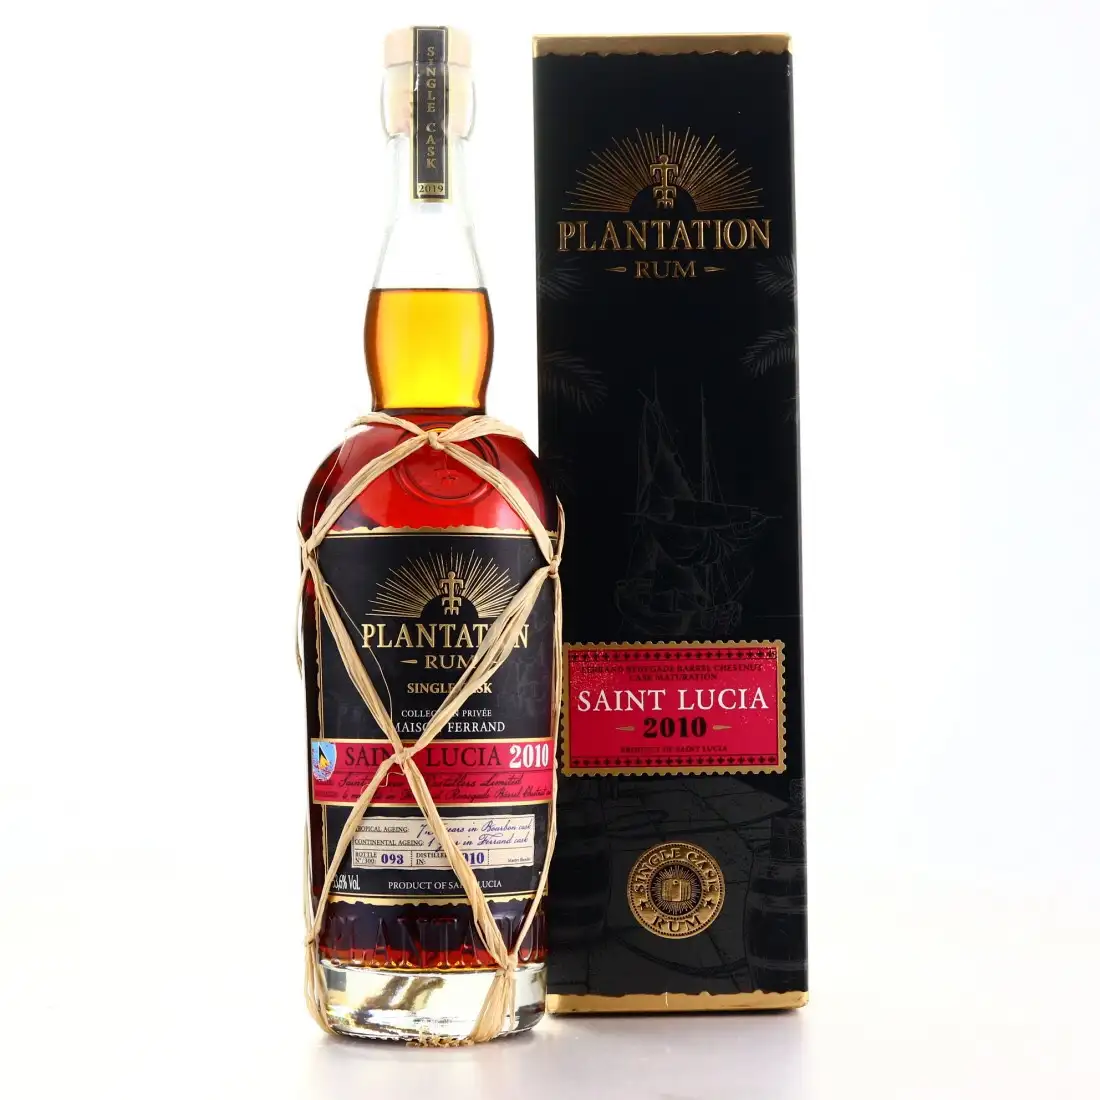 Image of the front of the bottle of the rum Plantation Saint Lucia